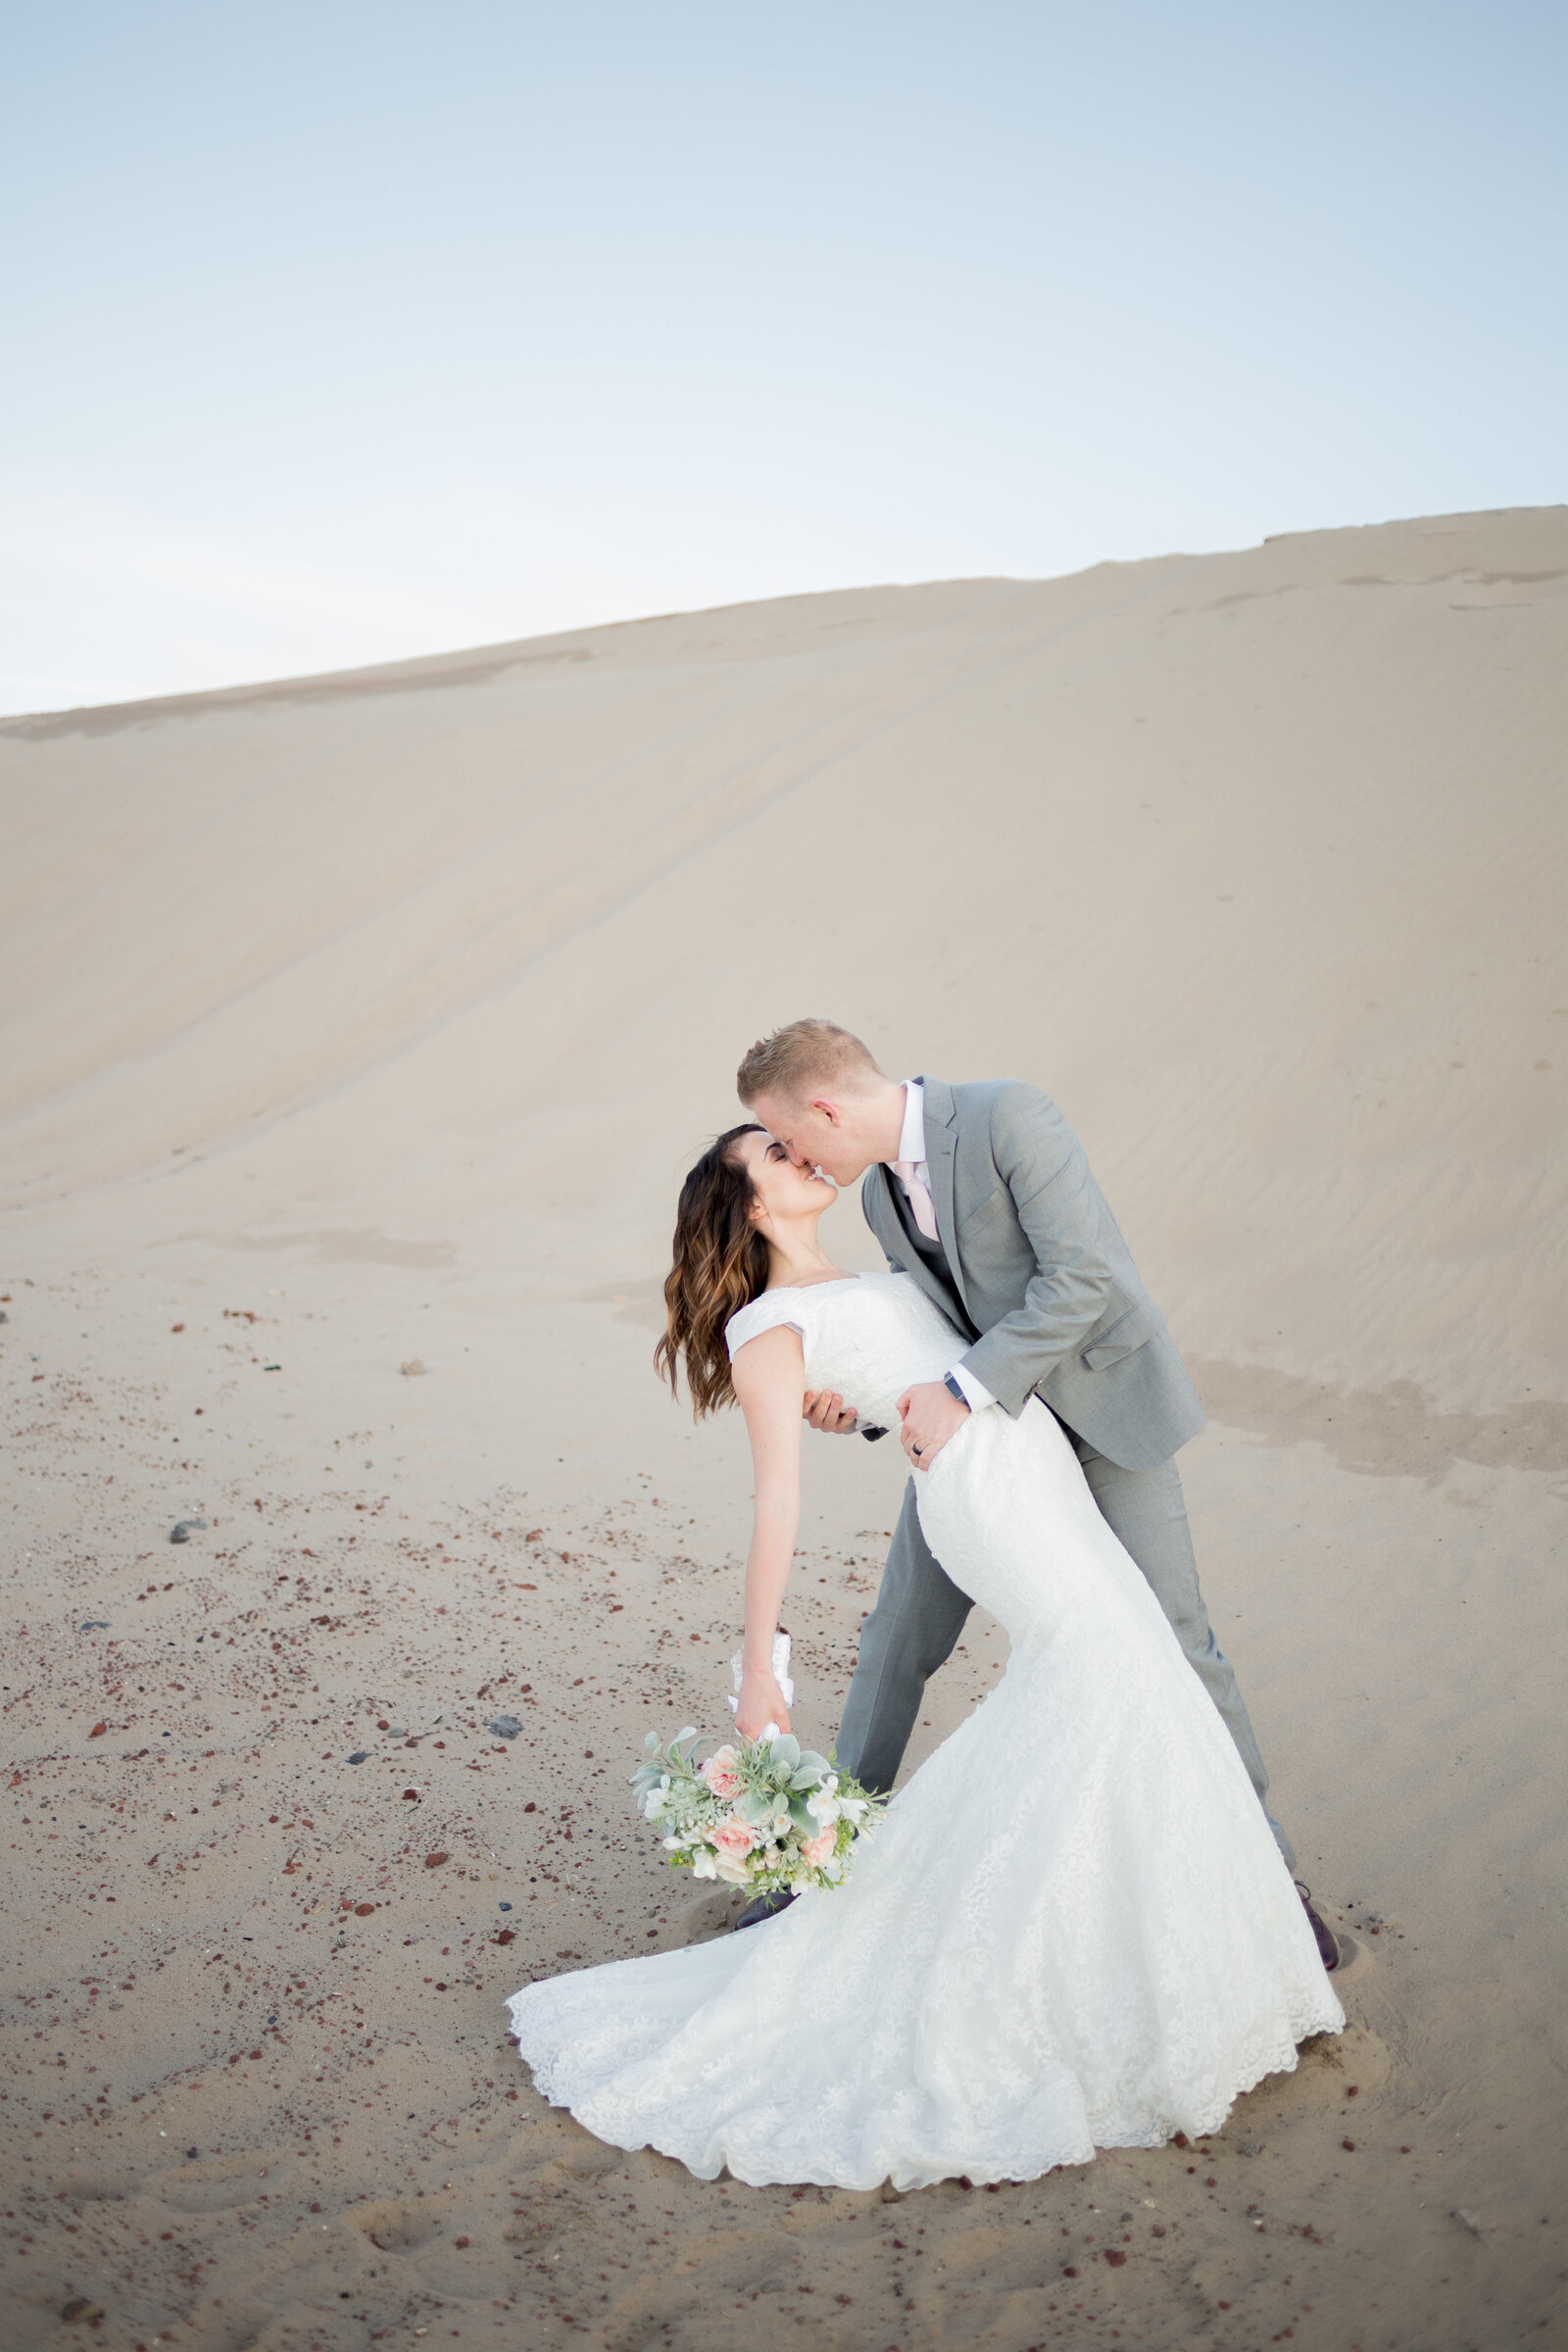 Idaho Falls Photographers capture bride and groom kissing during mountaintop bridals